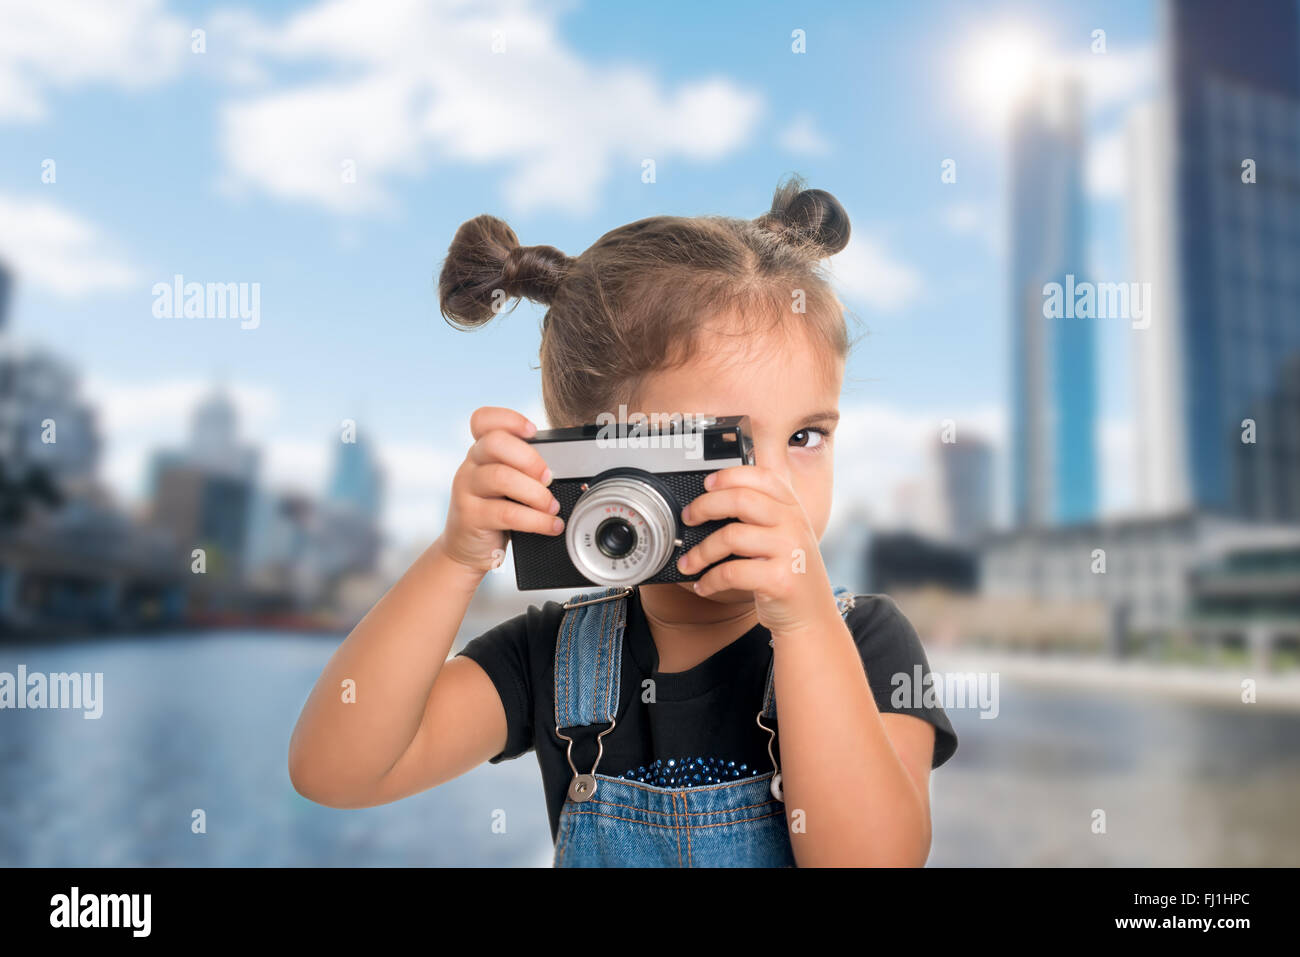 A little cute baby girl taking a picture with vintage camera over ...